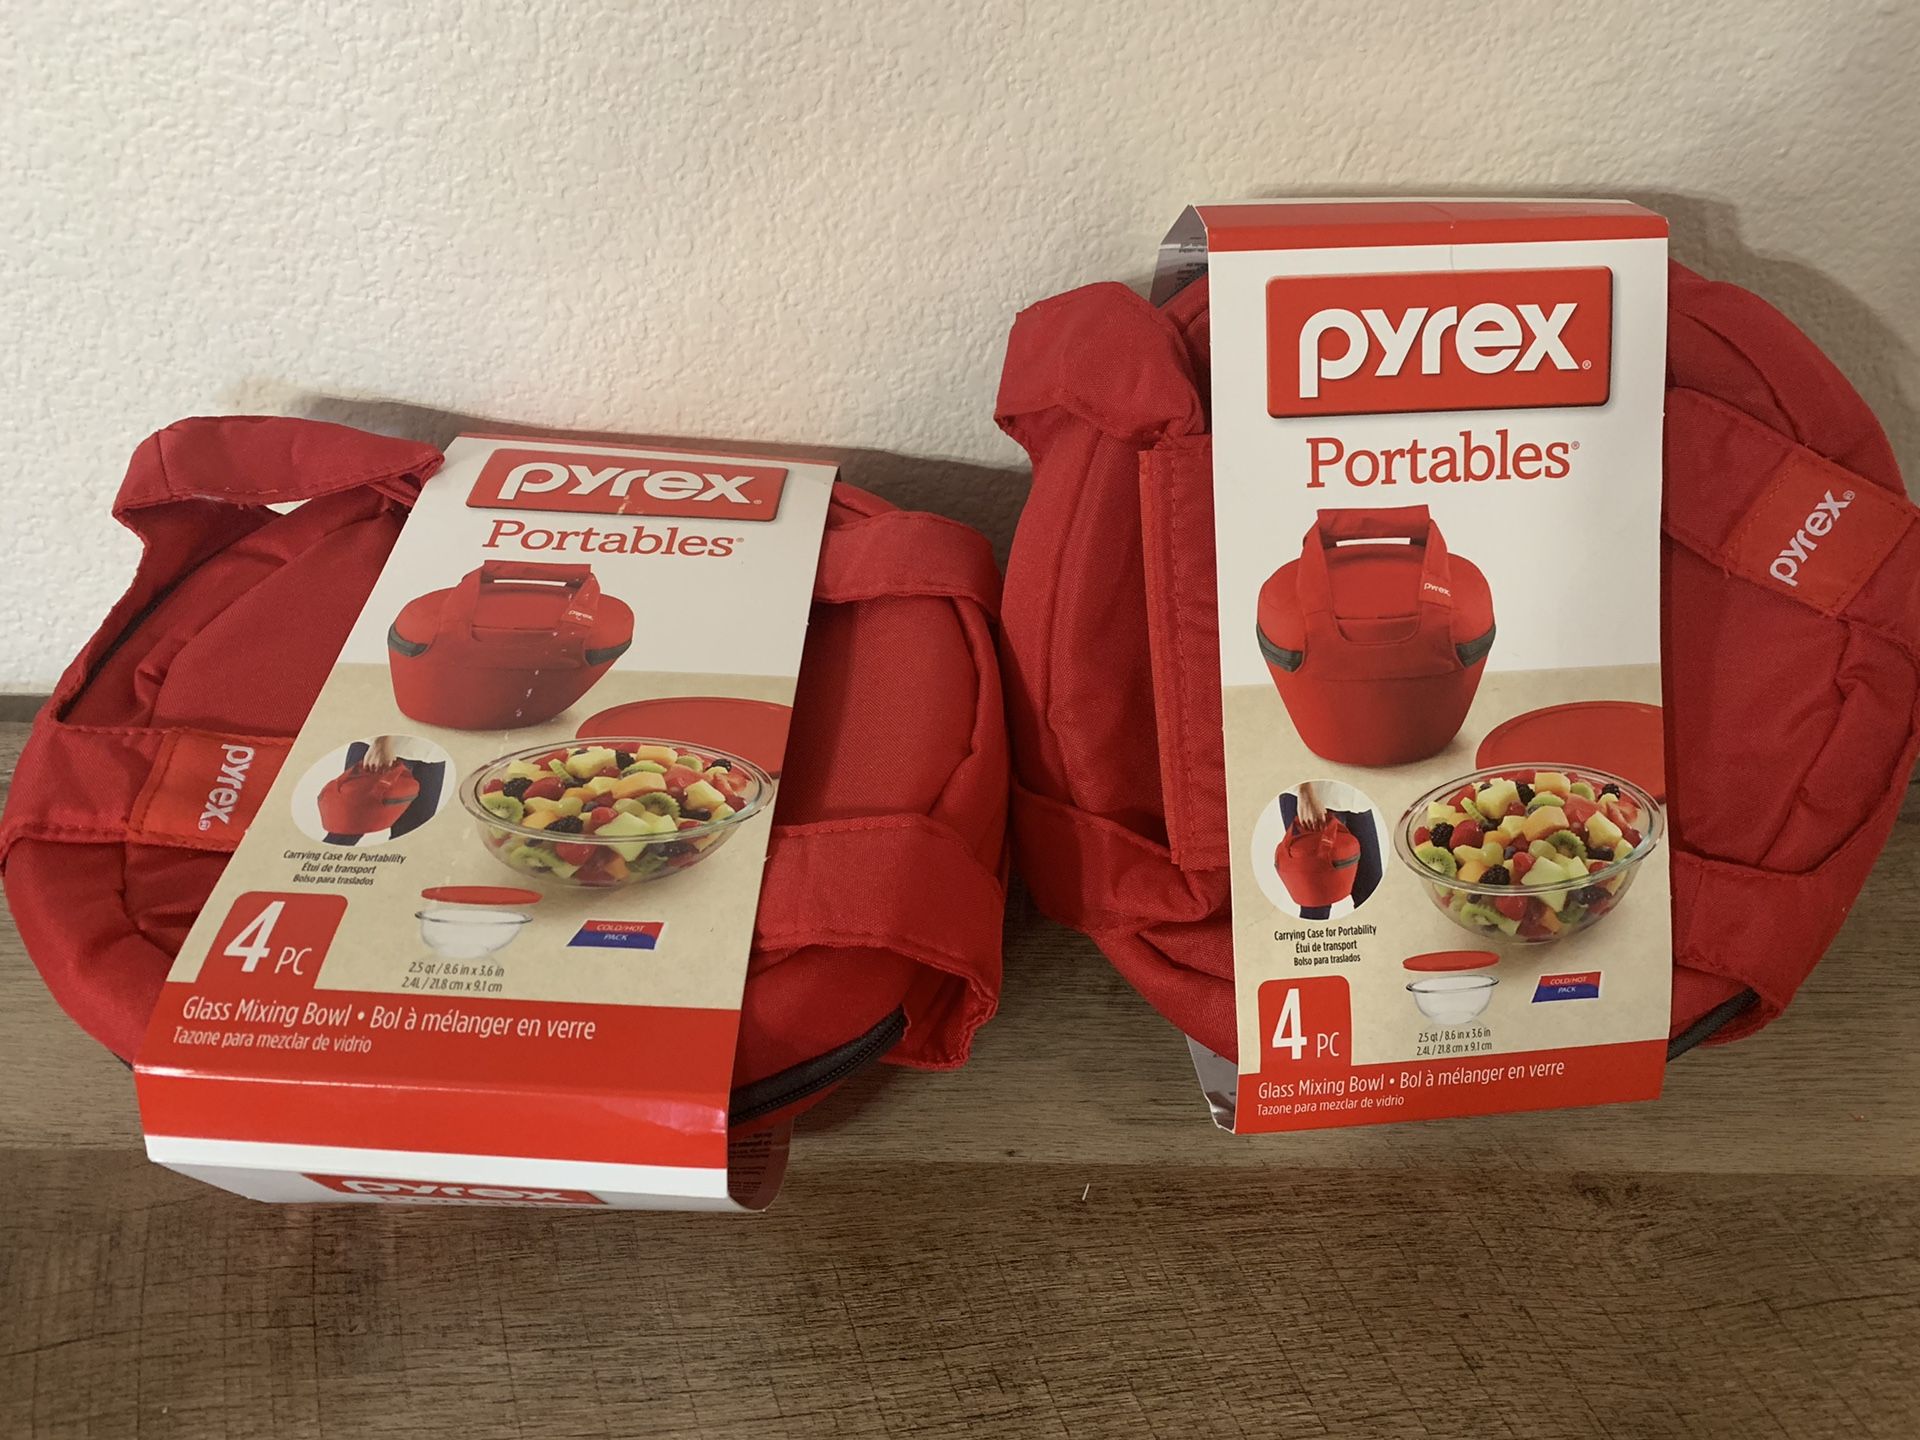 Pyrex Portables 4 pc Glass Mixing Bowl/insulated case